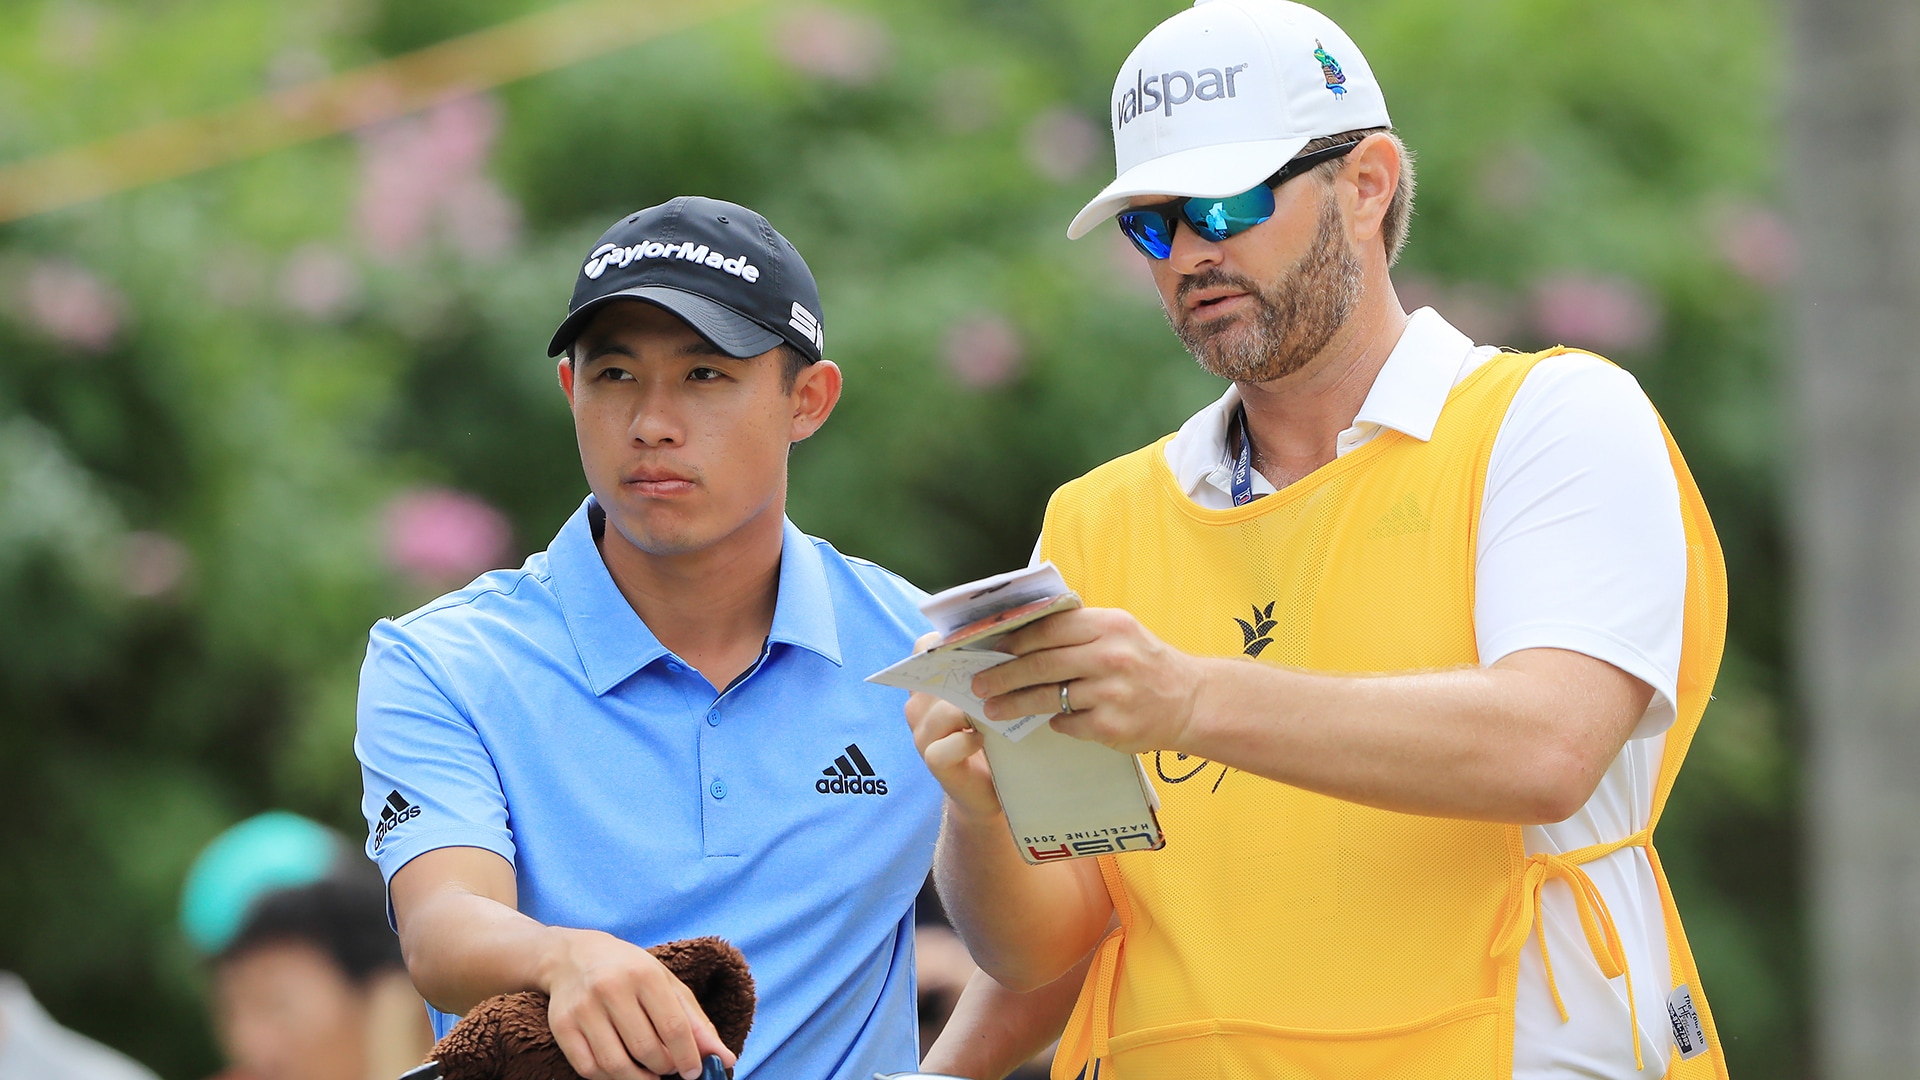 PGA Championship allows rangefinders, Collin Morikawa and other pros weigh in